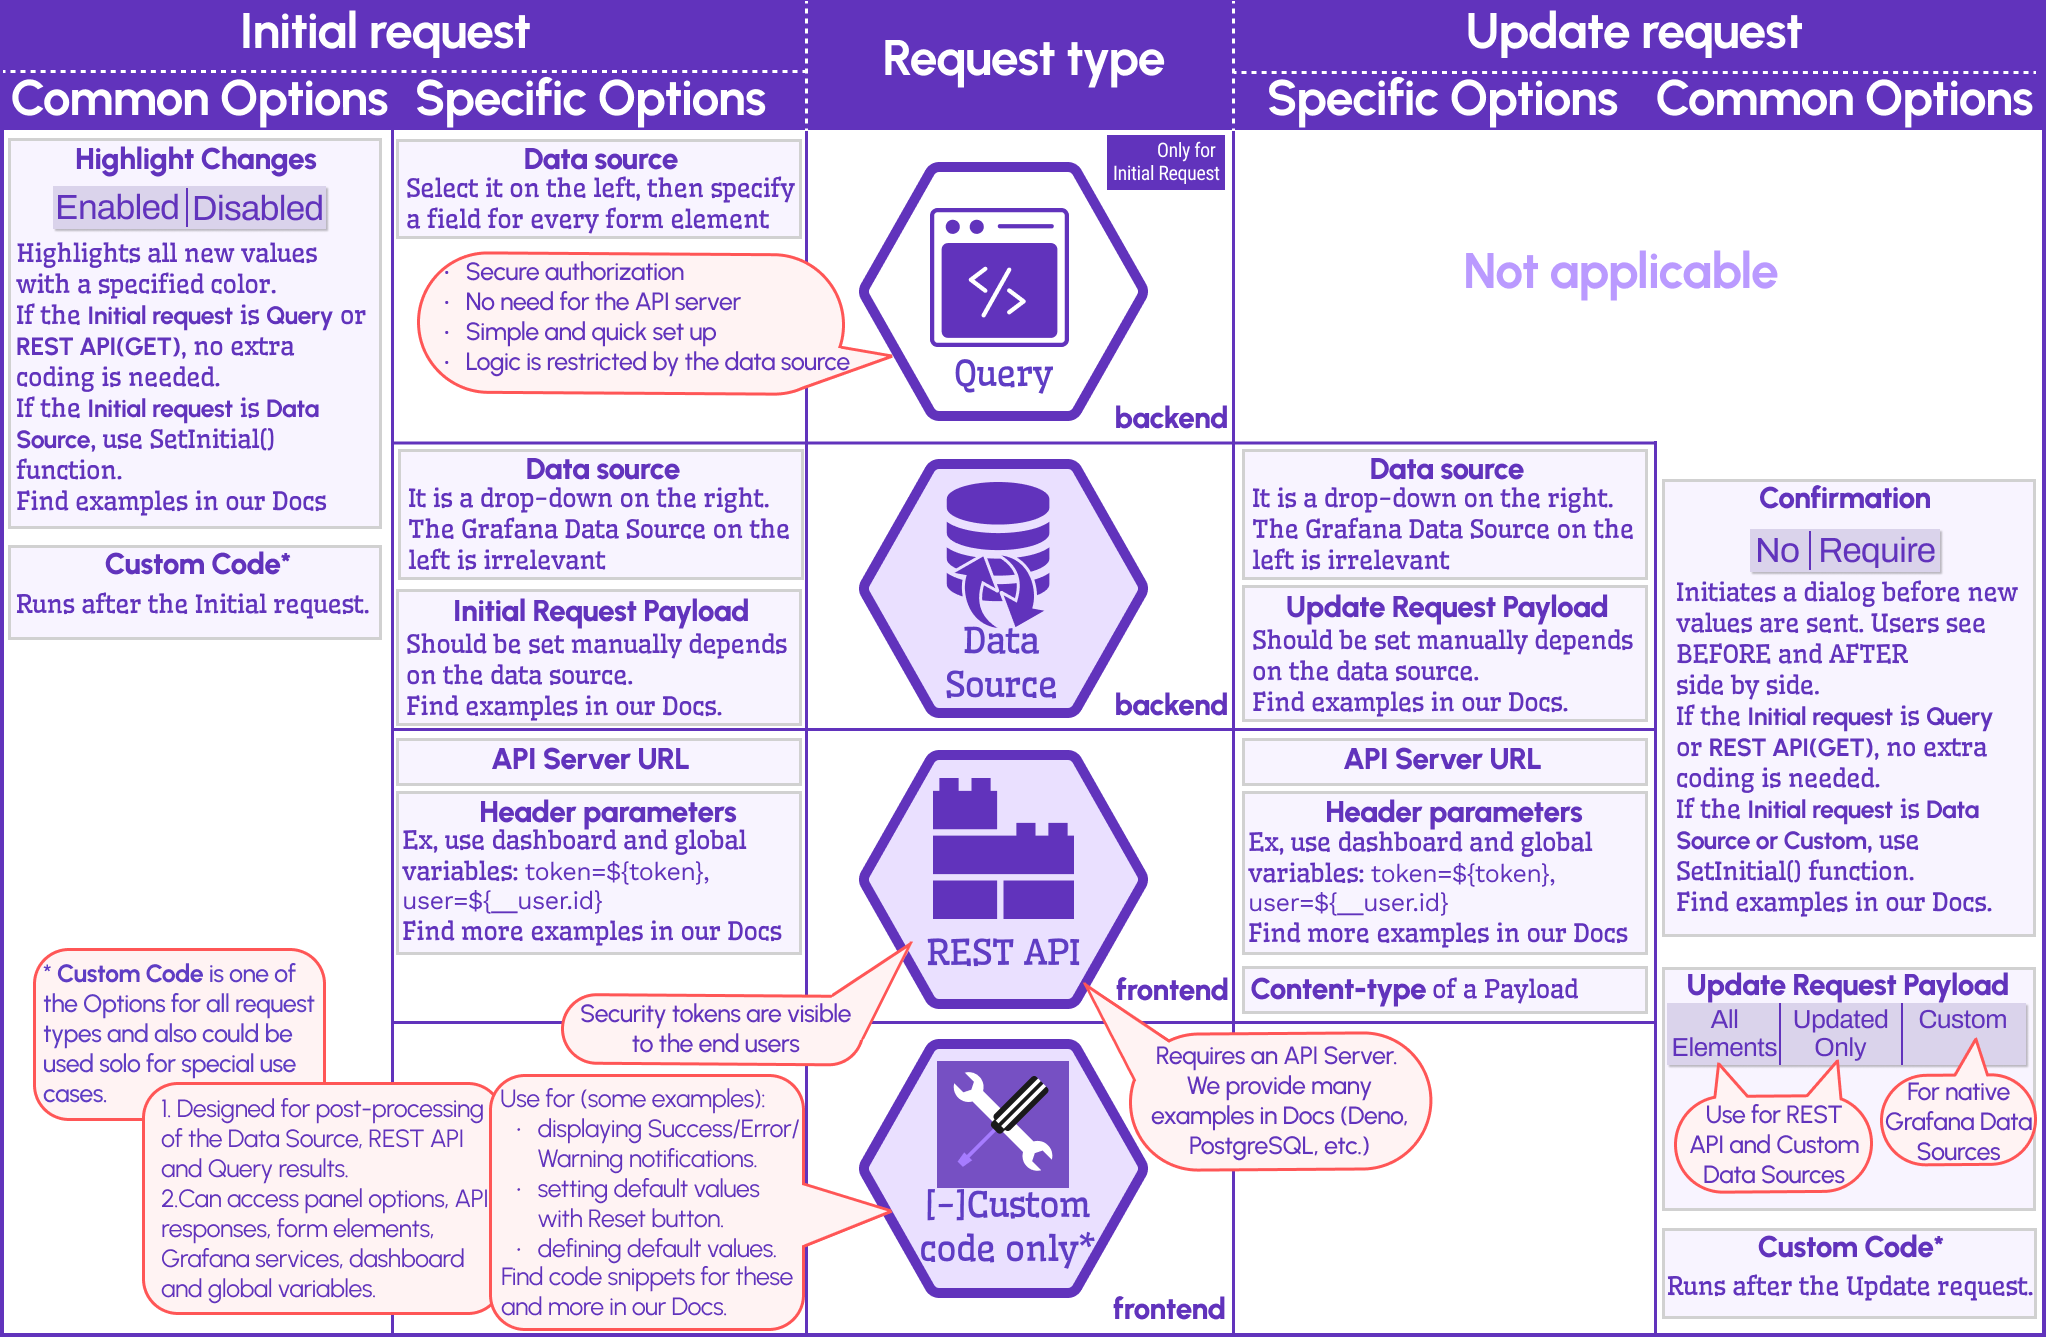 Similarities and differences between the initial and update requests.